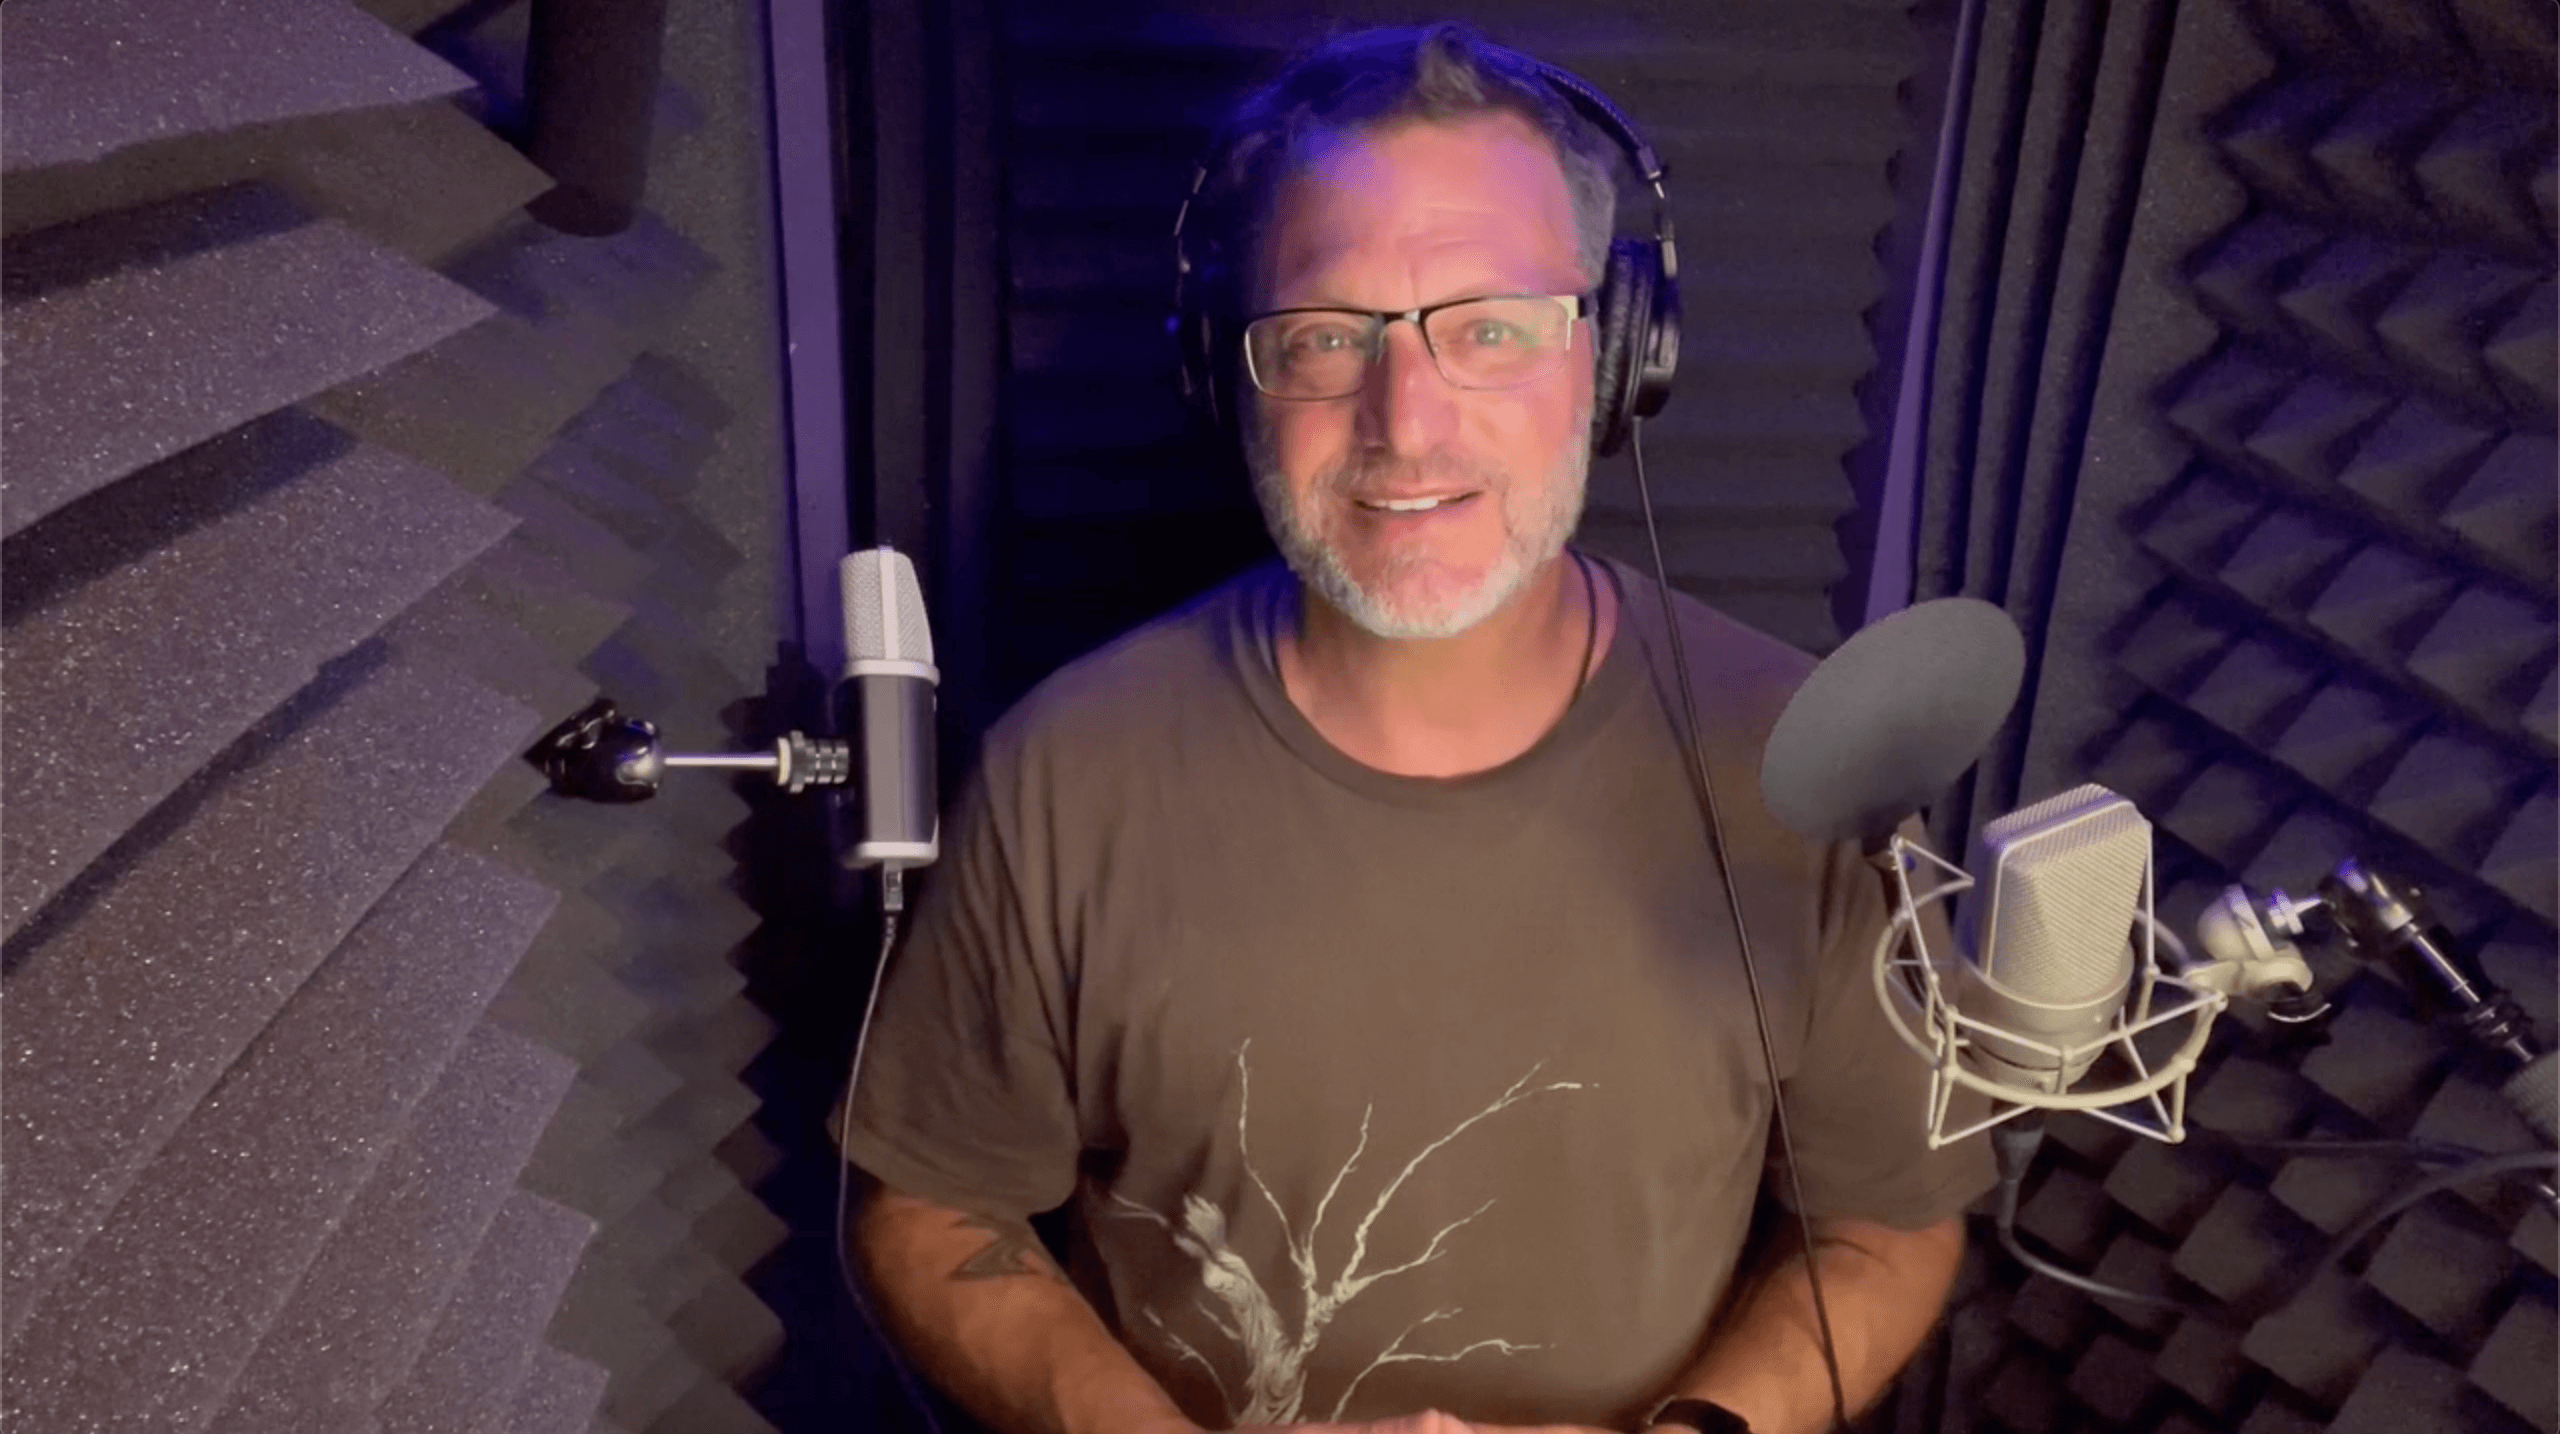 Steve Blum in the booth